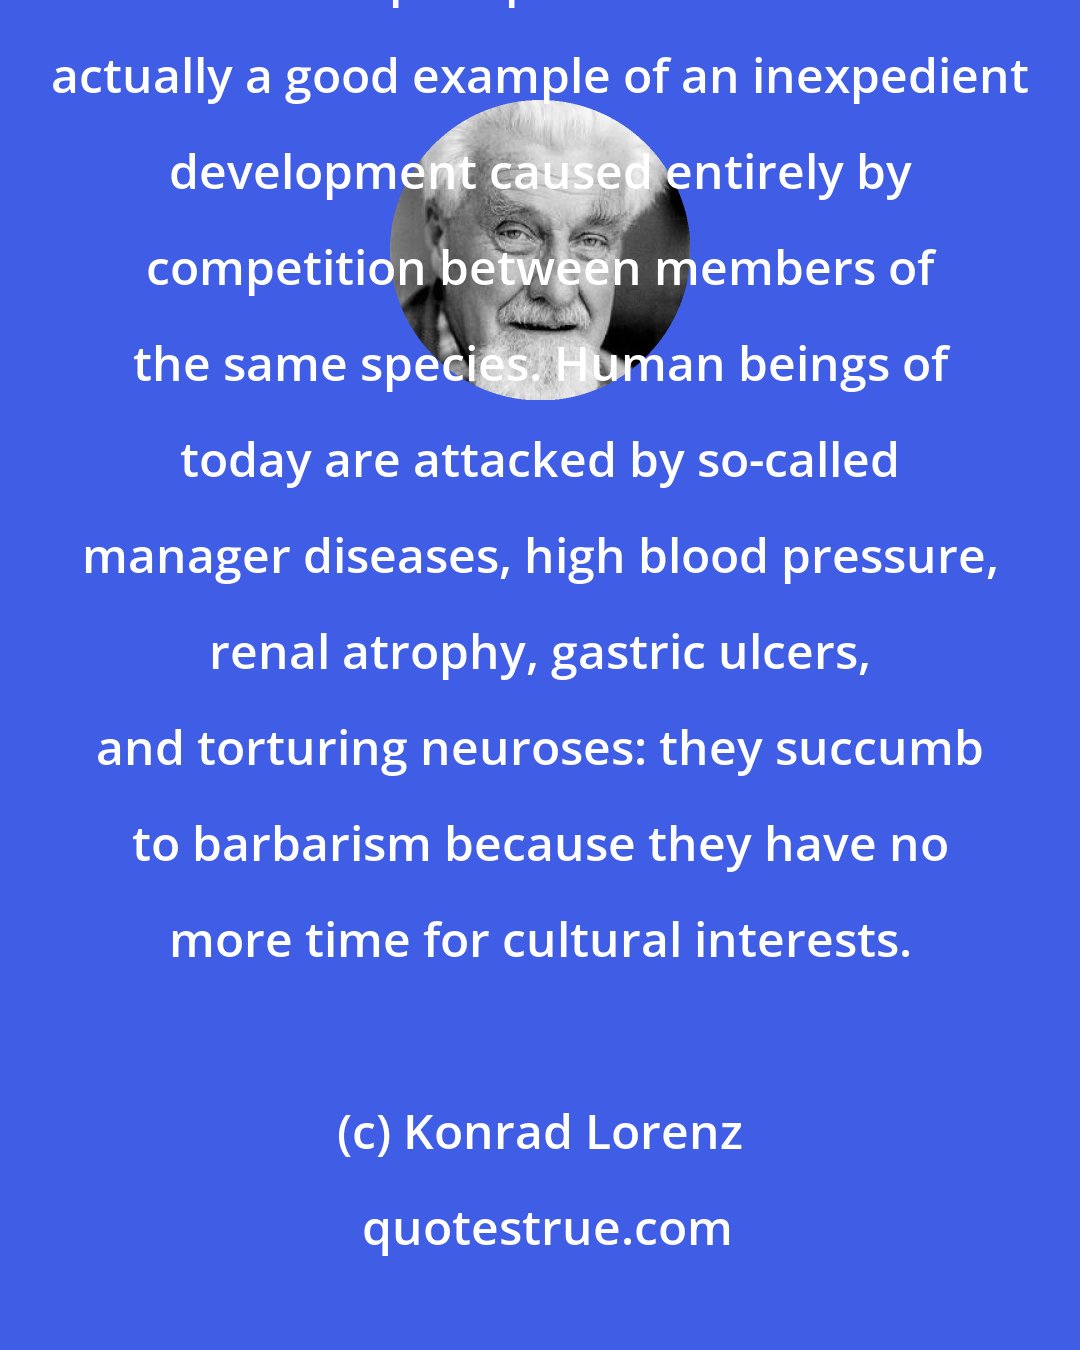 Konrad Lorenz: The rushed existence into which industrialized, commercialized man has precipitated himself is actually a good example of an inexpedient development caused entirely by competition between members of the same species. Human beings of today are attacked by so-called manager diseases, high blood pressure, renal atrophy, gastric ulcers, and torturing neuroses: they succumb to barbarism because they have no more time for cultural interests.